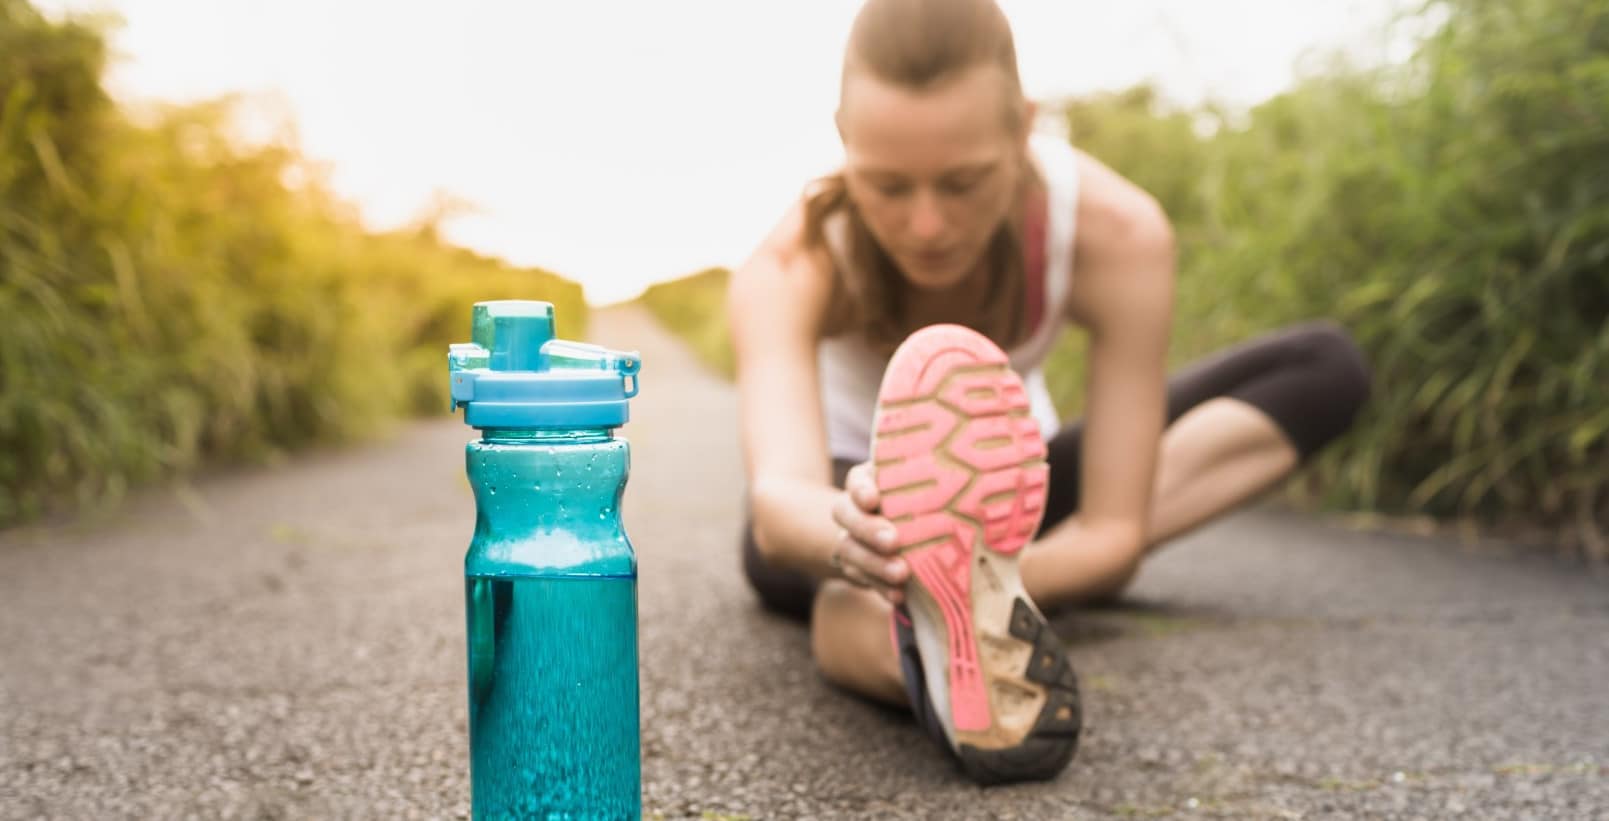 Female runner stretching next to bottle of water